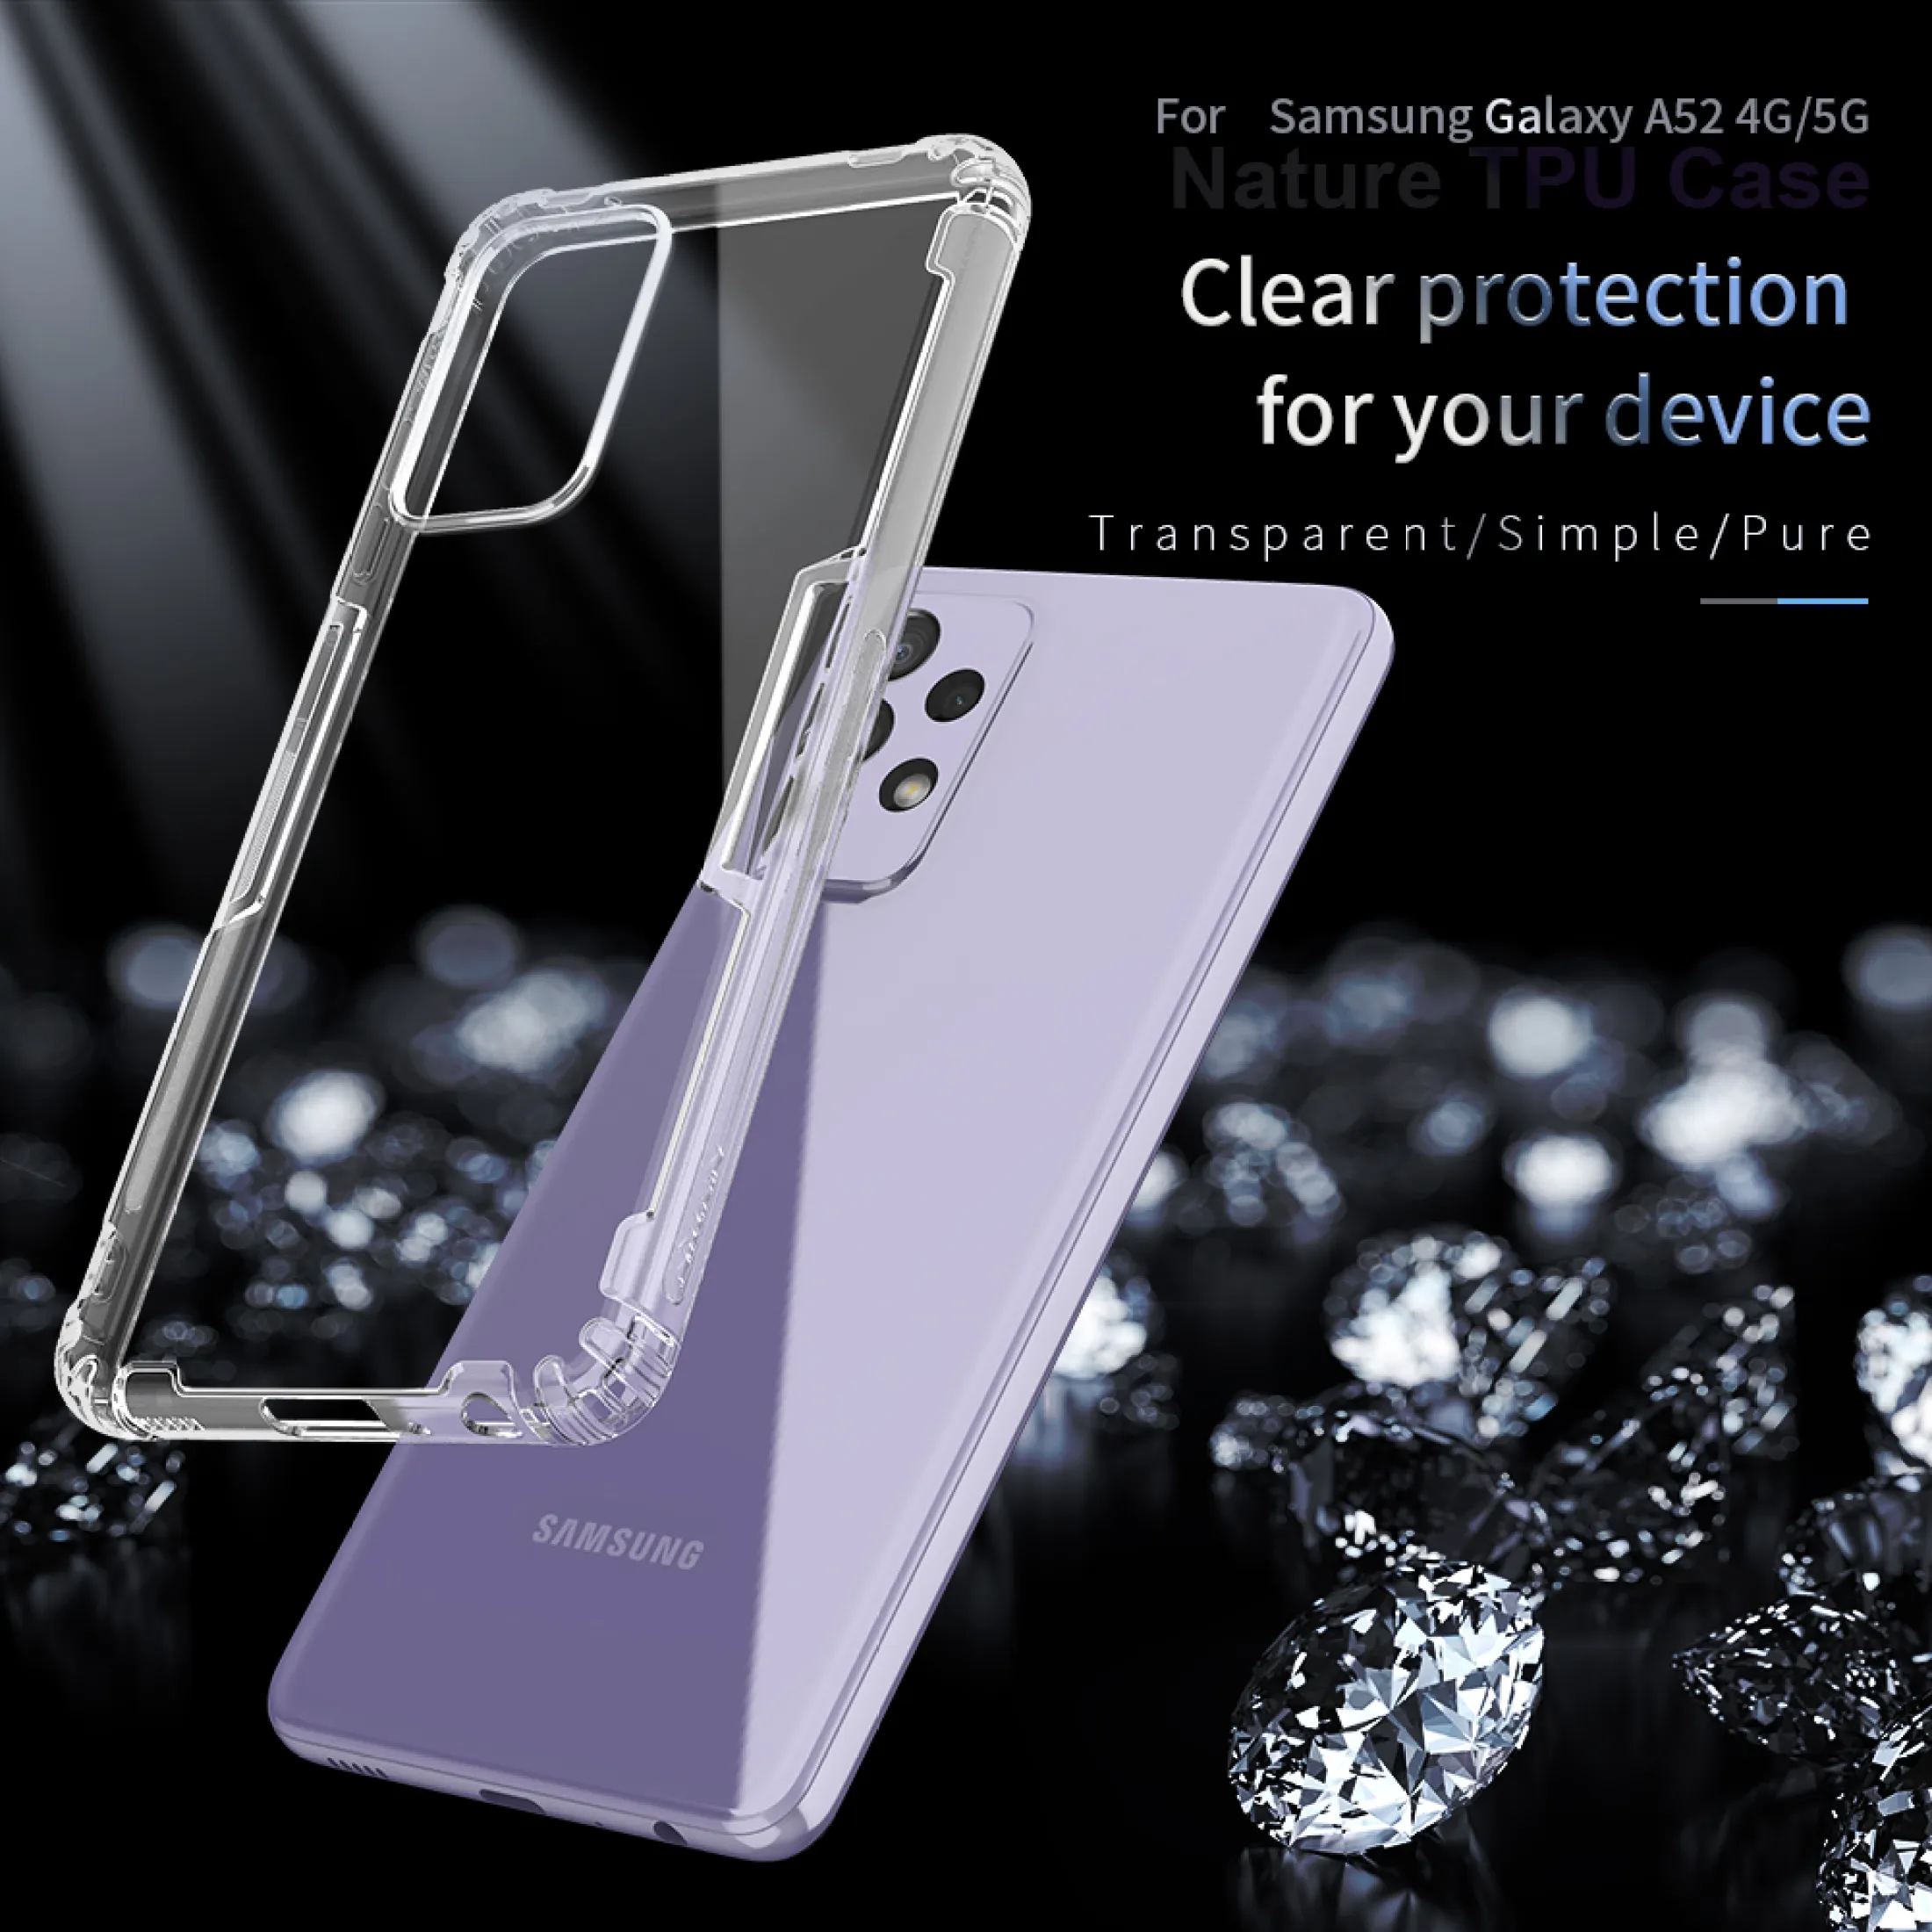 Nillkin Samsung Galaxy A52 4G / 5G Soft Case Nature TPU Cases Ultra Thin 0.6mm Silicone Back Cover 2